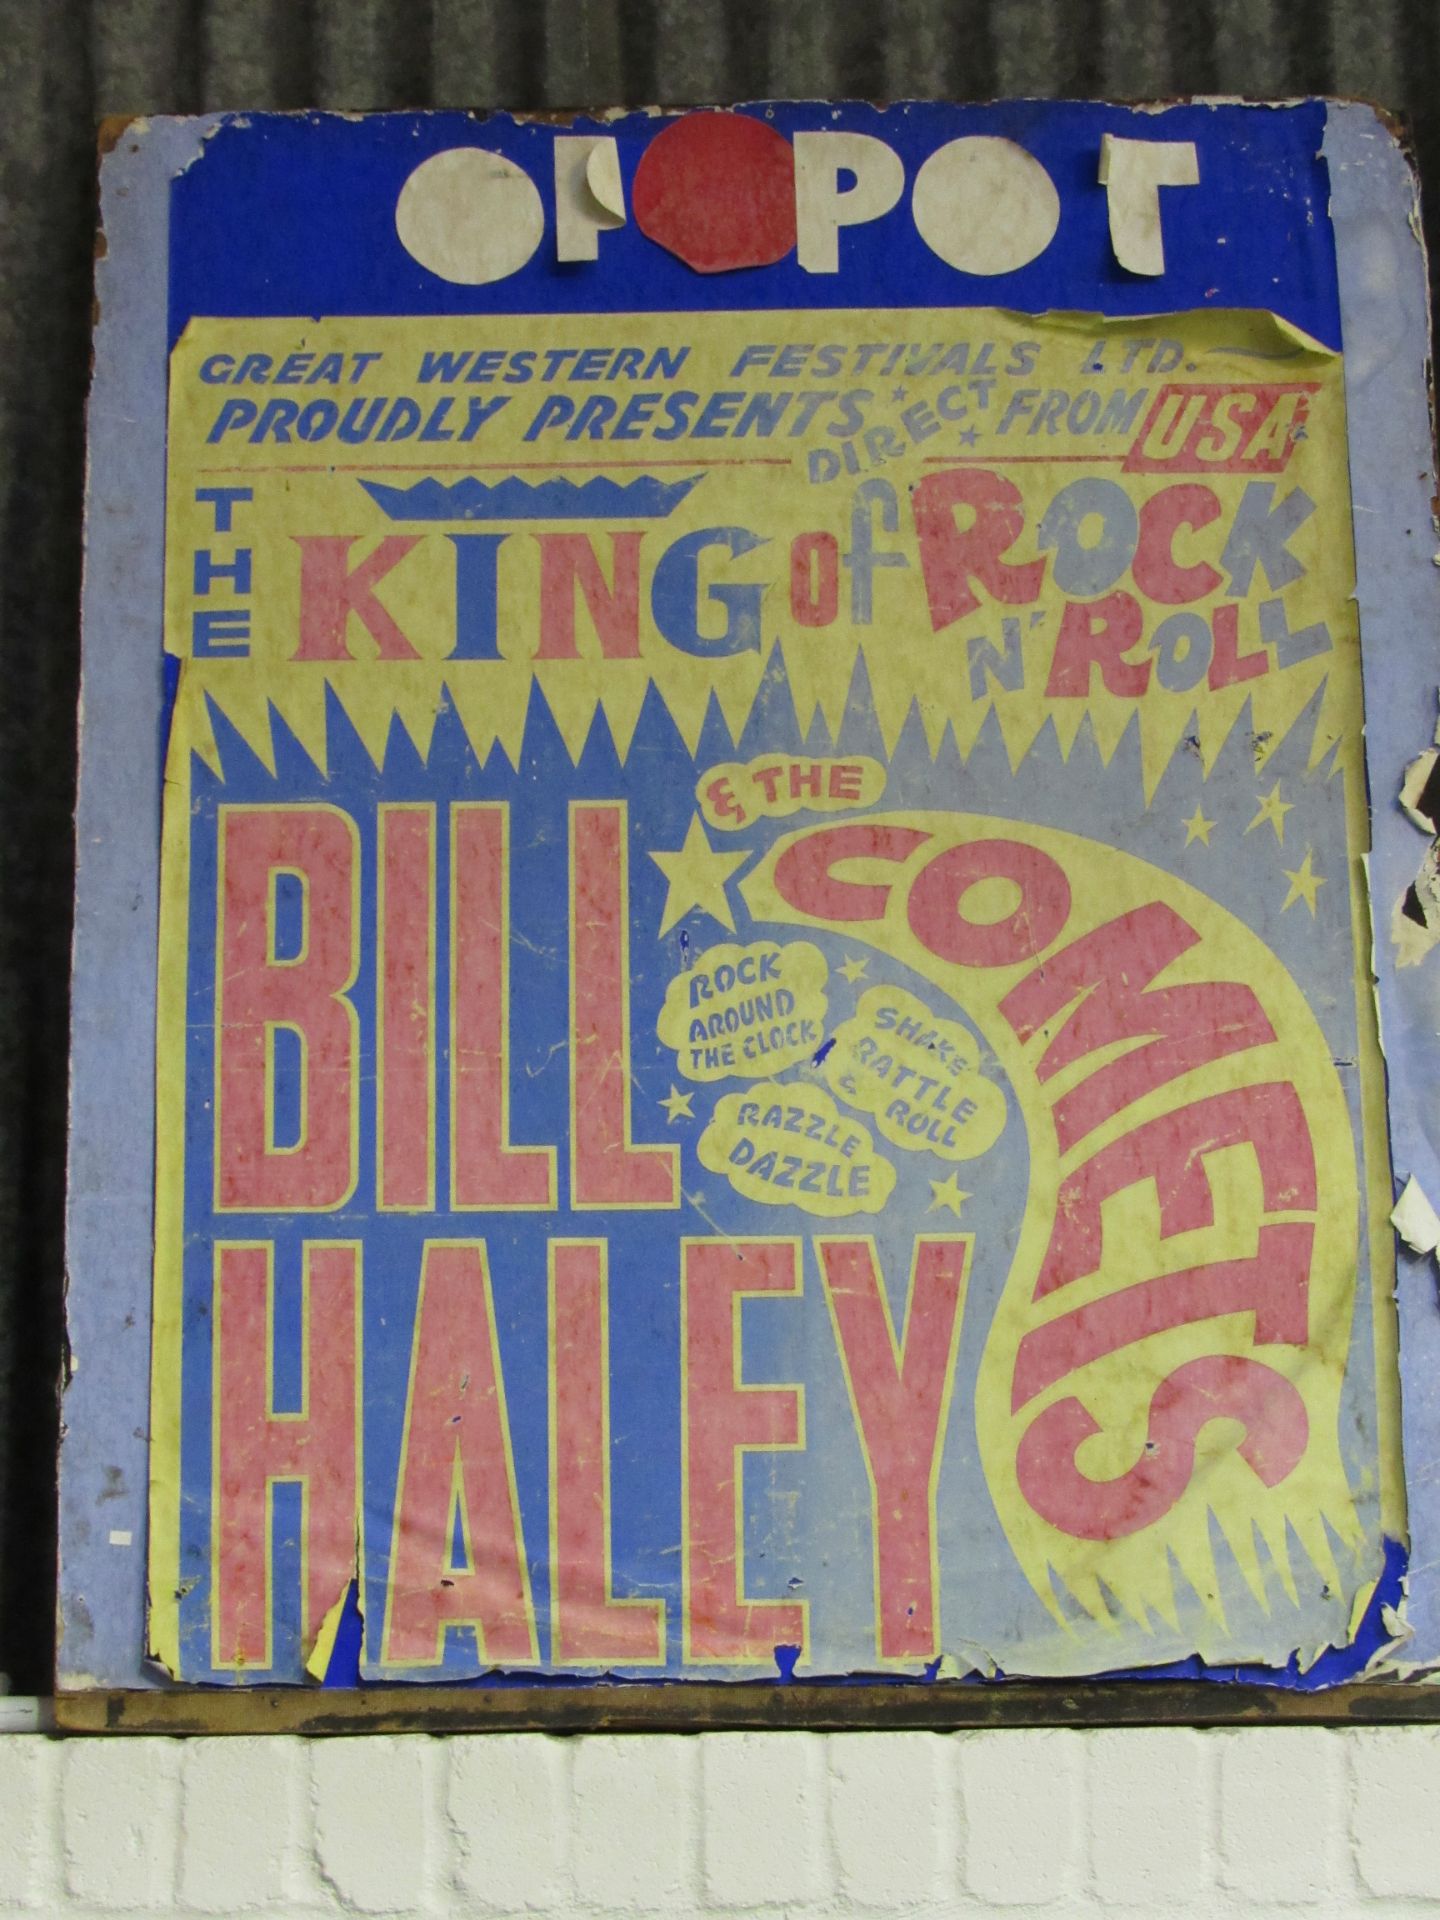 Bill Haley and the Comets original billboard poster on its hoarding. This poster advertised a